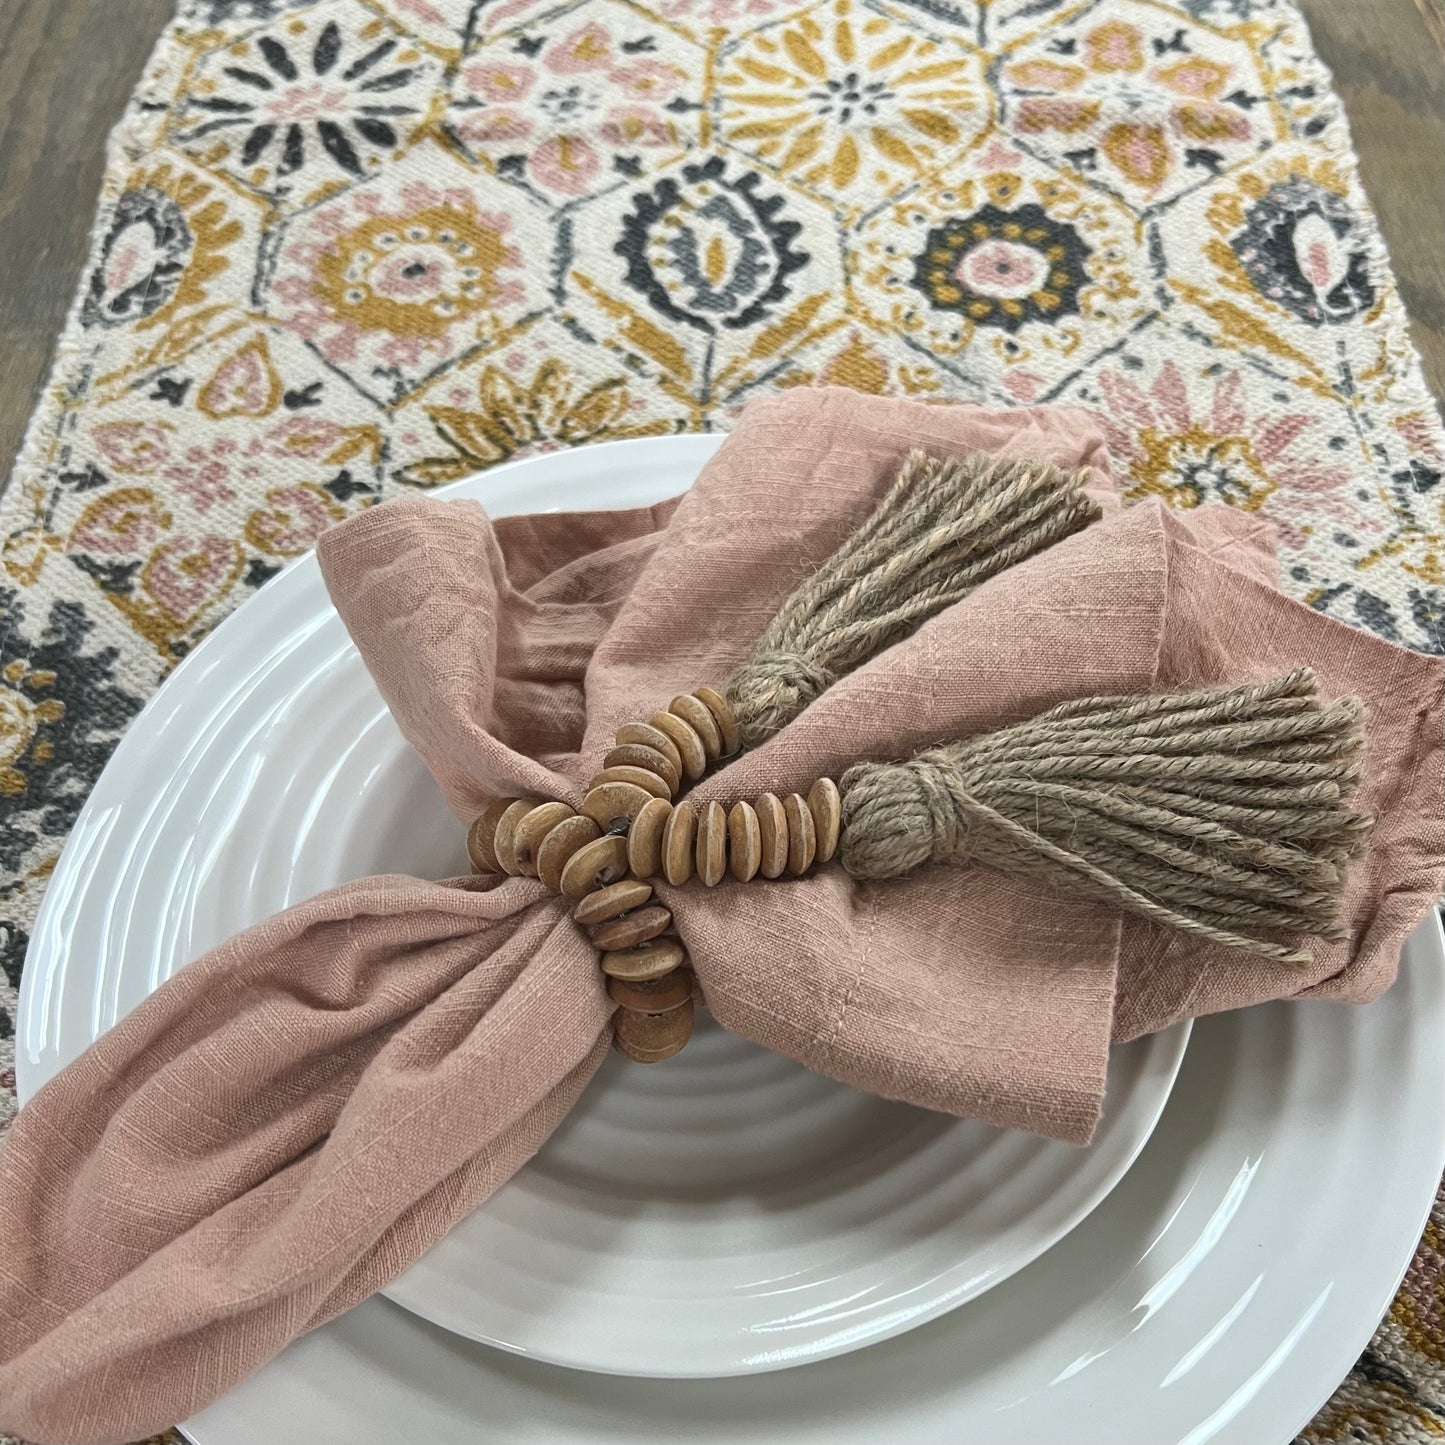 top view of table with runner, white dishes, and blush napkin.